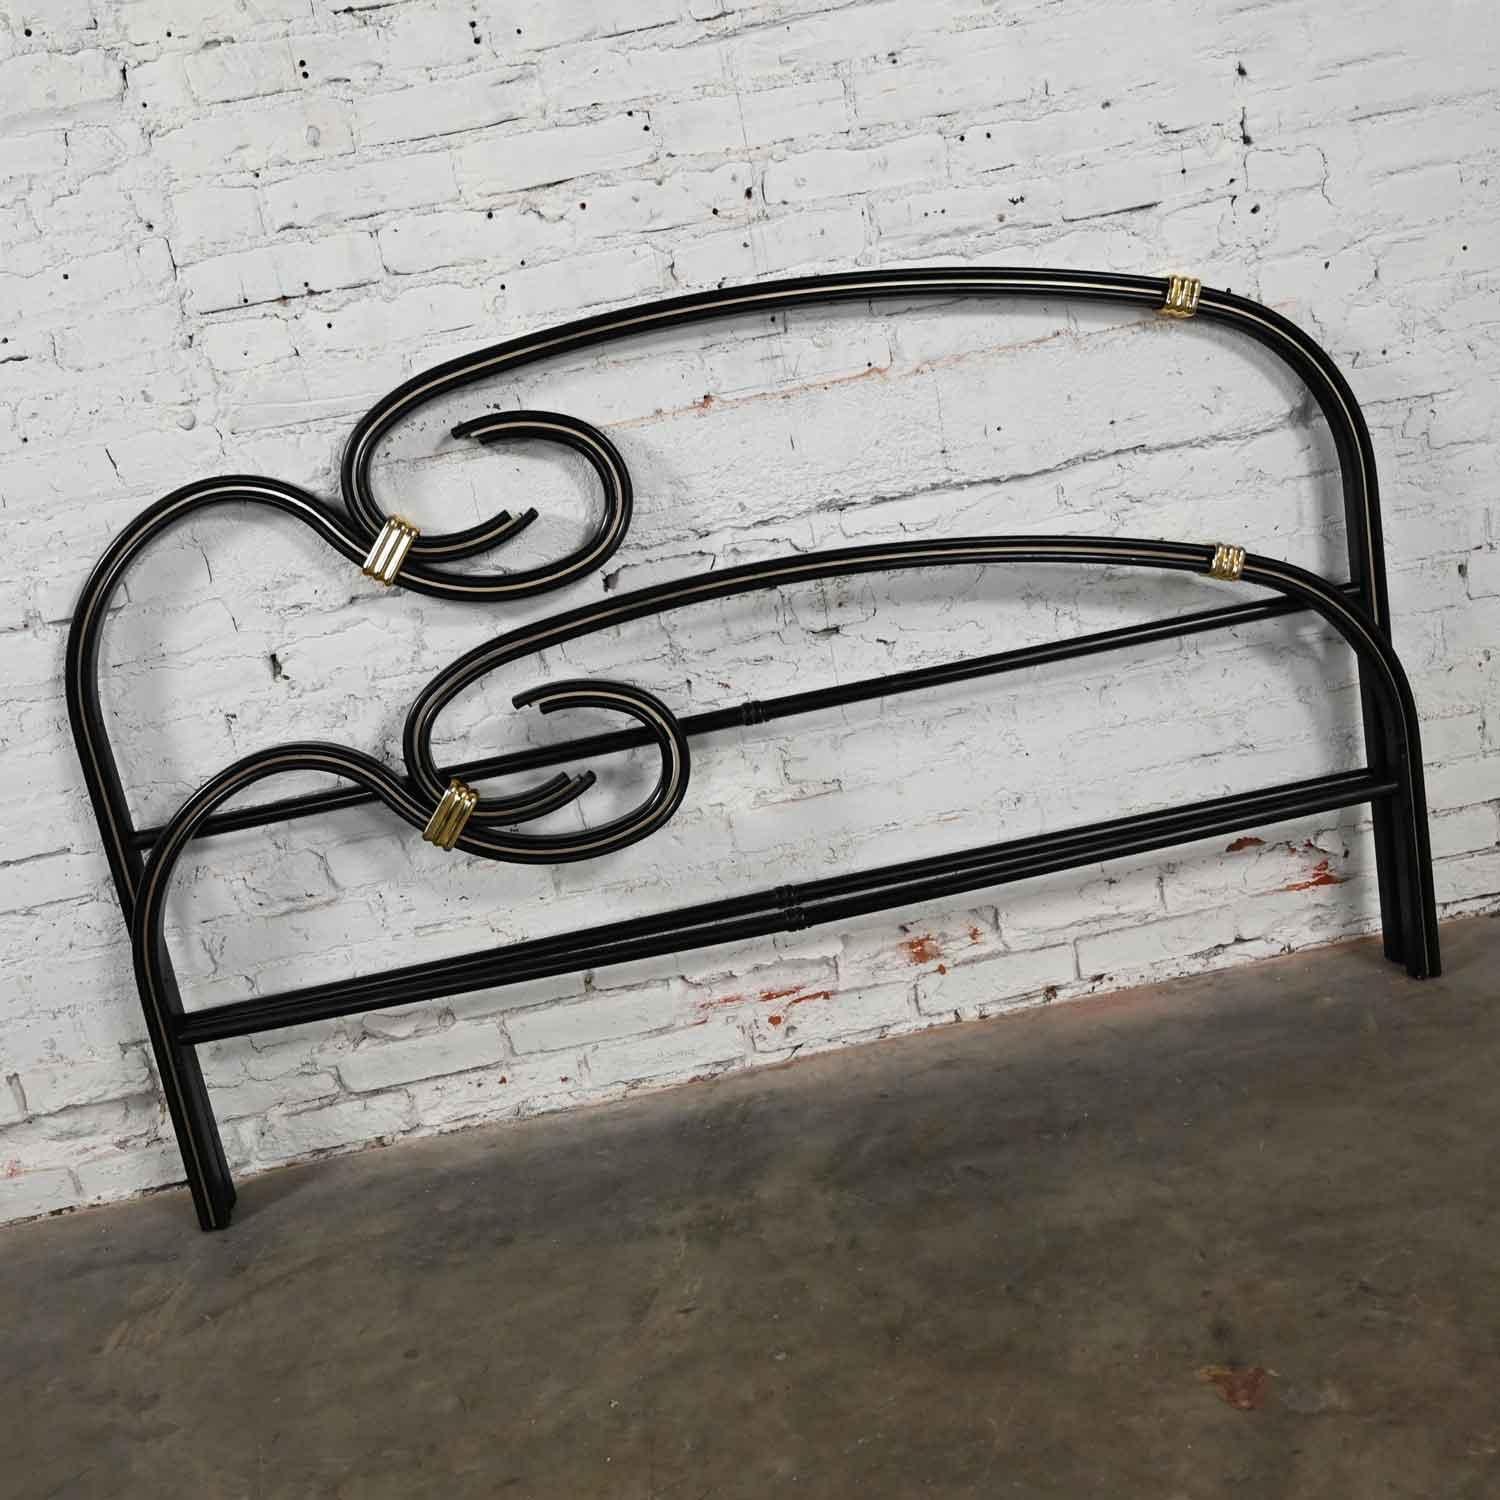 20th Century Art Deco Revival Black Gold Flattened Metal Tube Queen Bed by Michele Archiutti For Sale